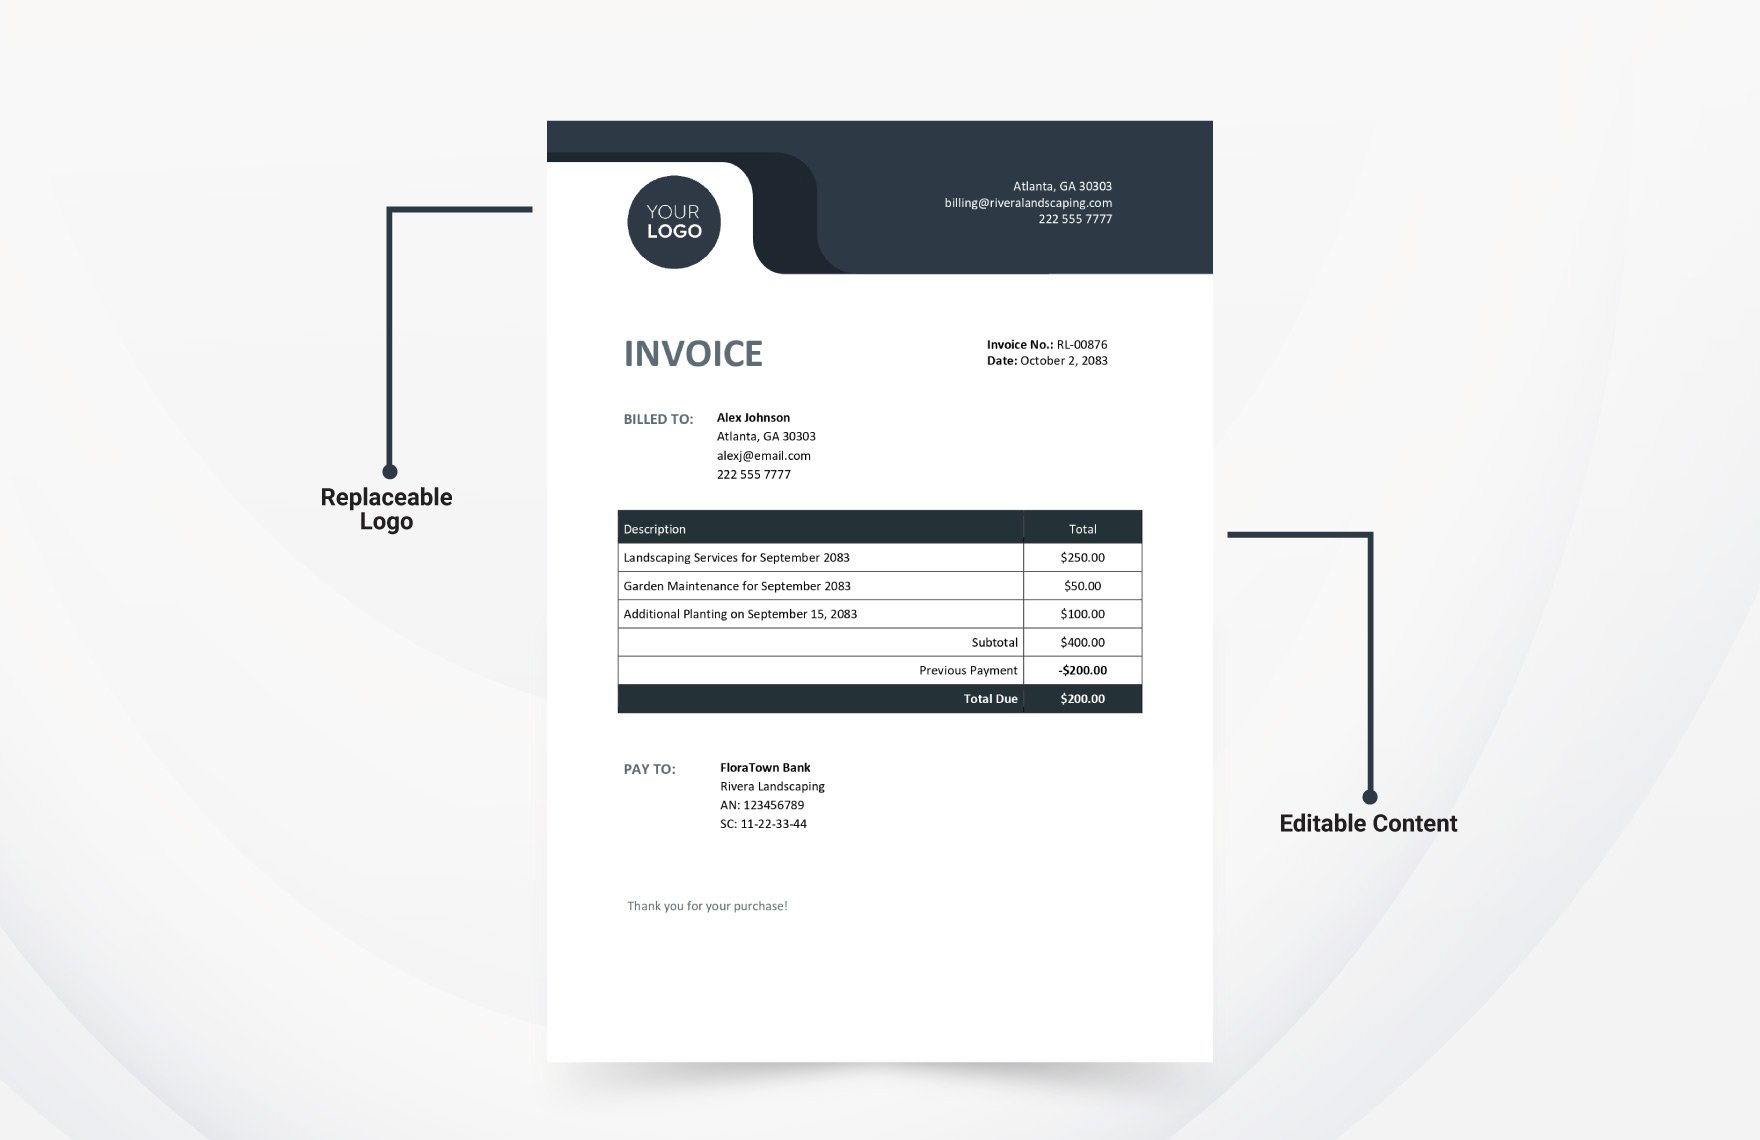 Payment Invoice Template